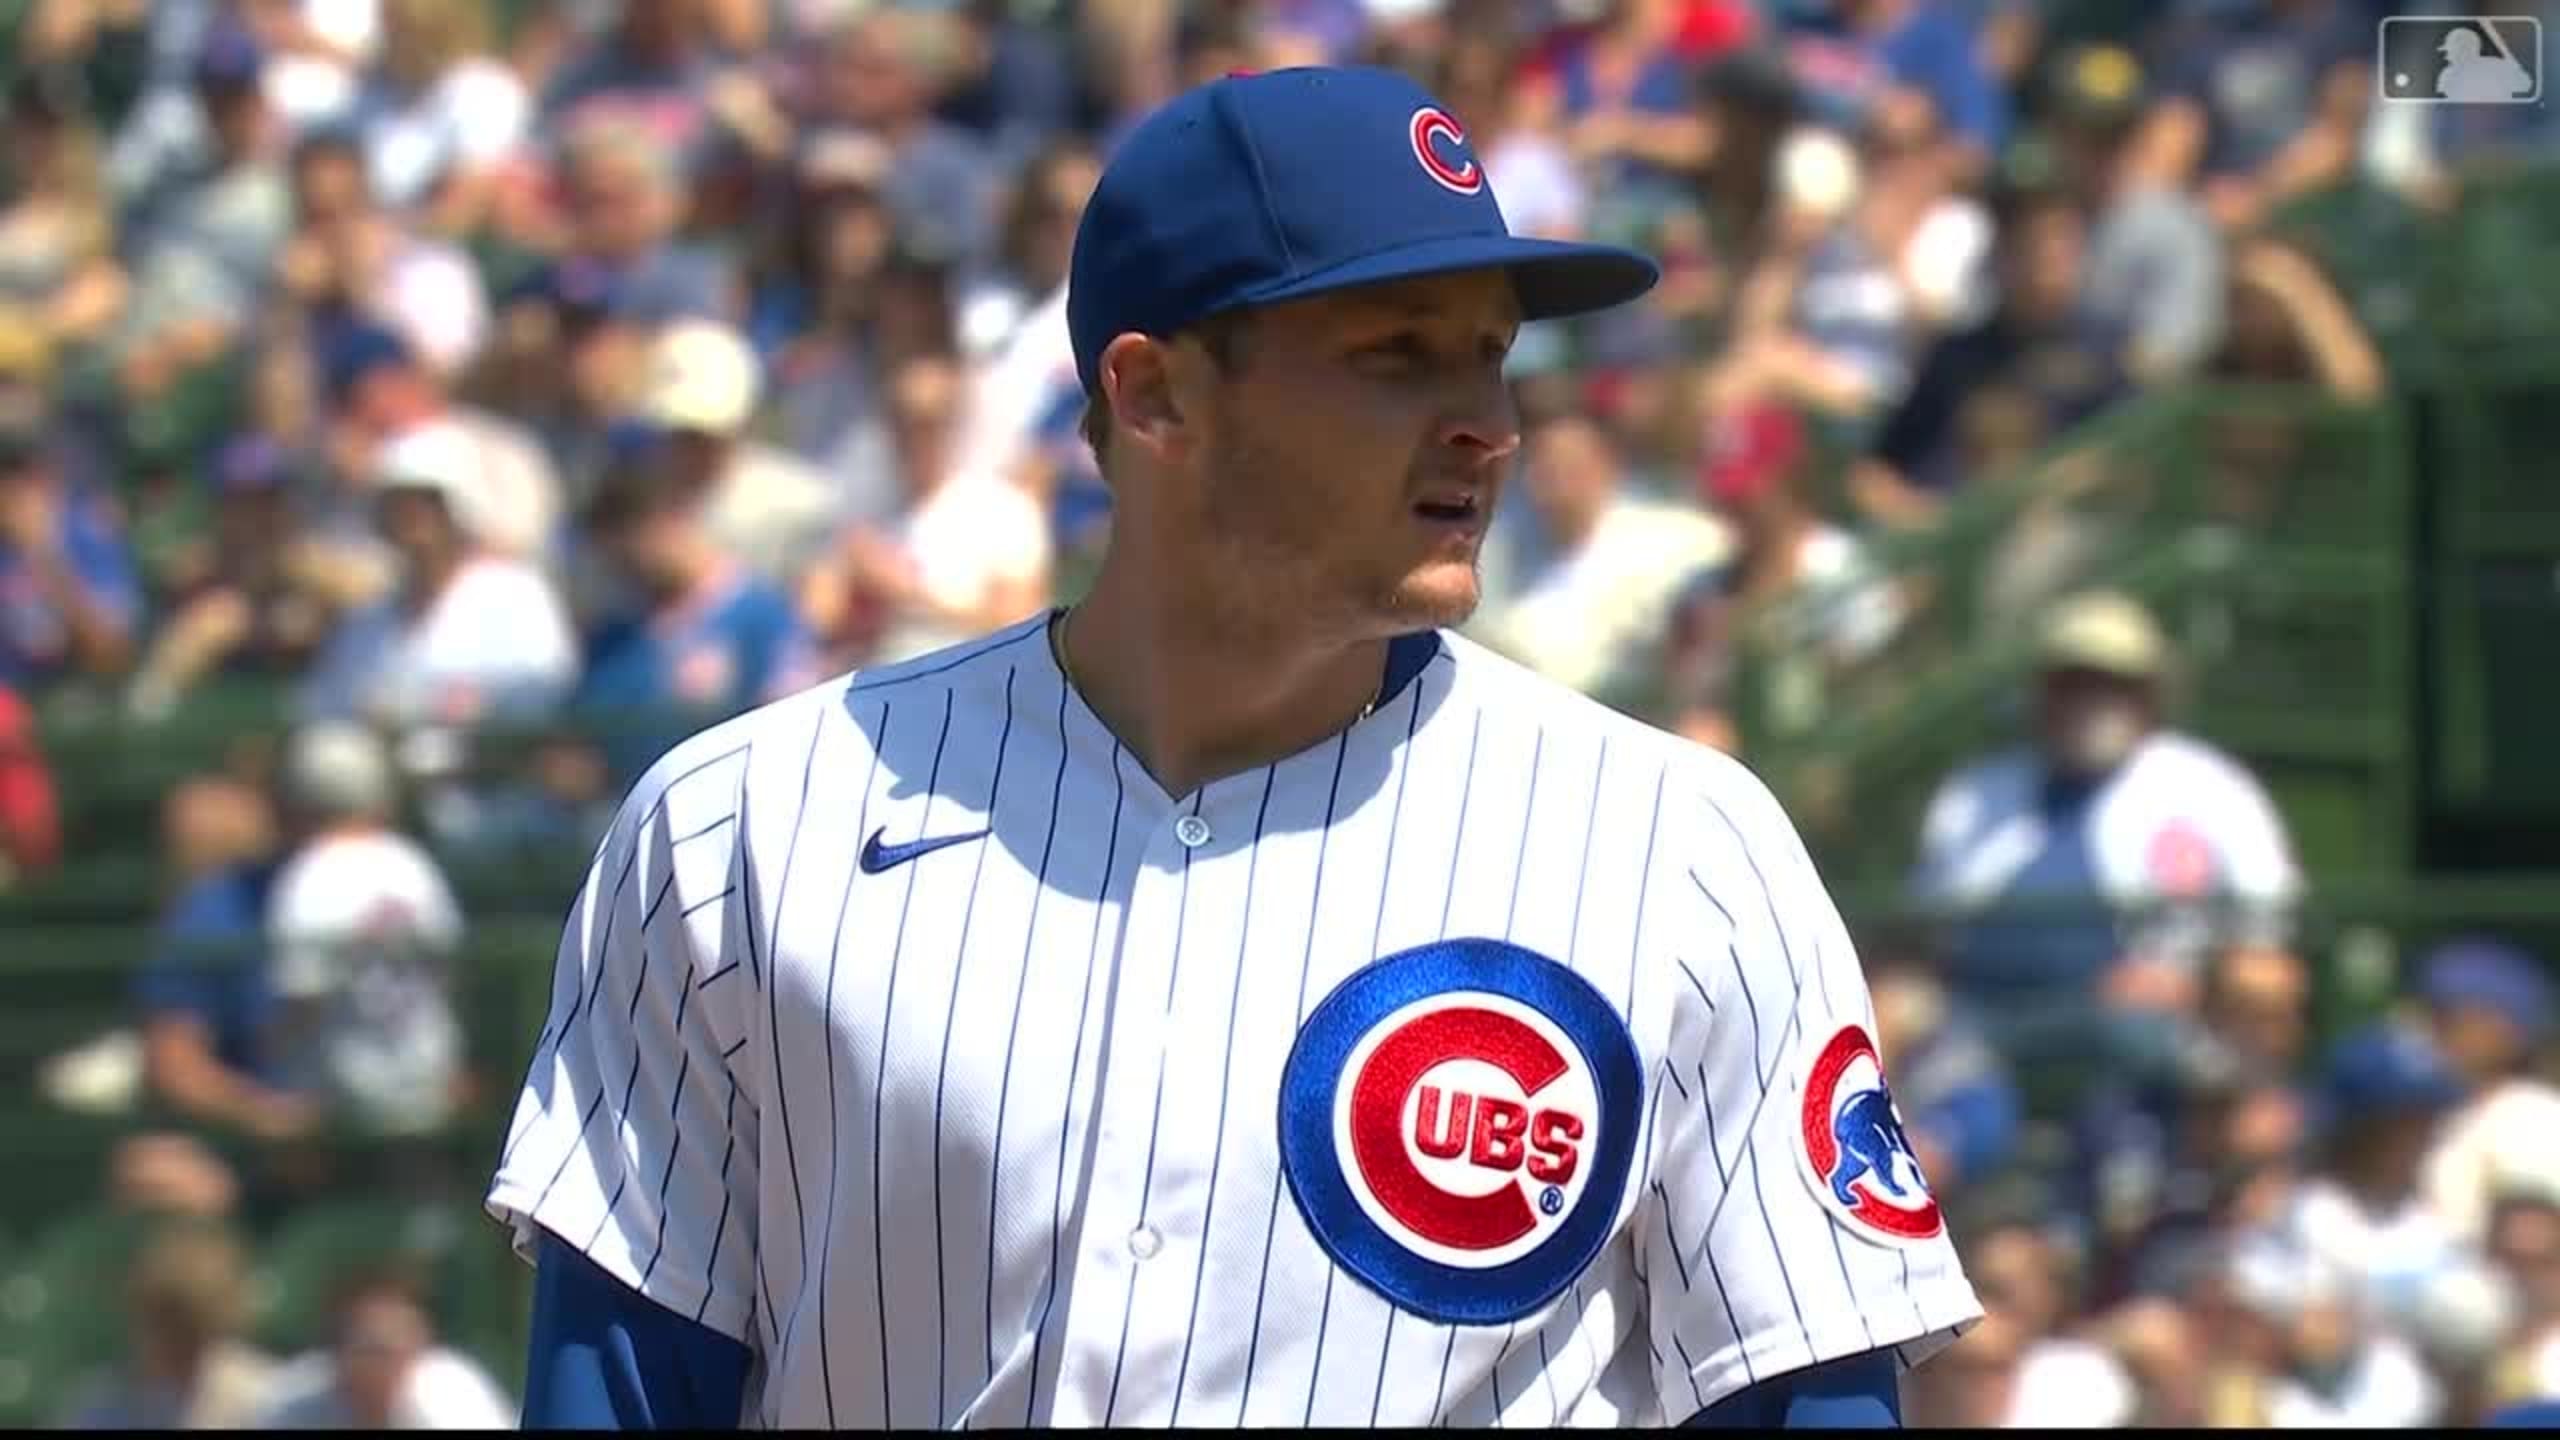 Cubs' Contreras keeps focus on baseball, blocks out contract